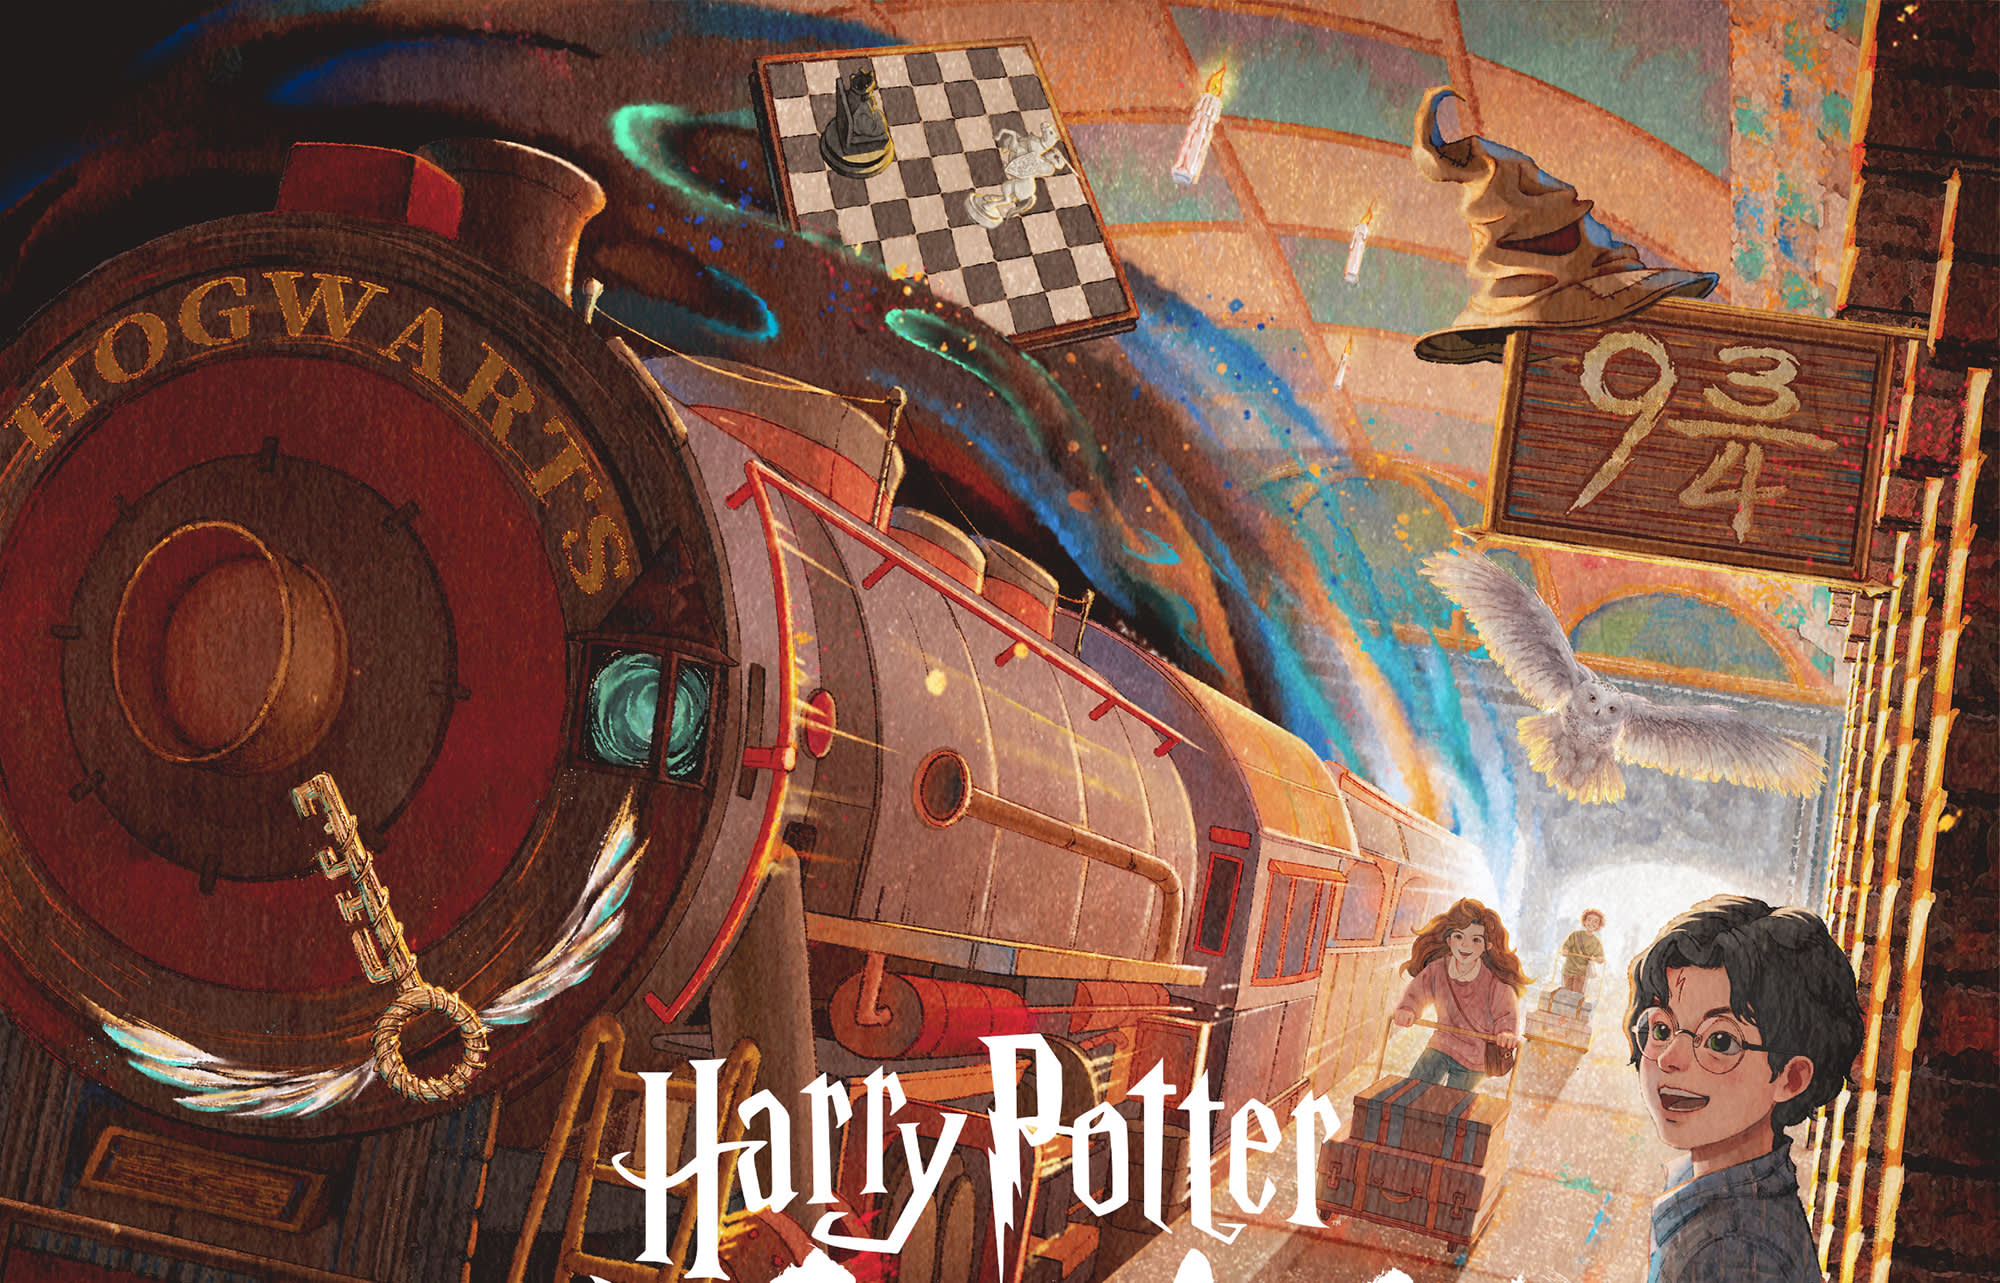 Harry Potter Audio Book Pottermore Publishing and Ximalaya release the first Chinese versions of  the Harry Potter audiobooks | Wizarding World